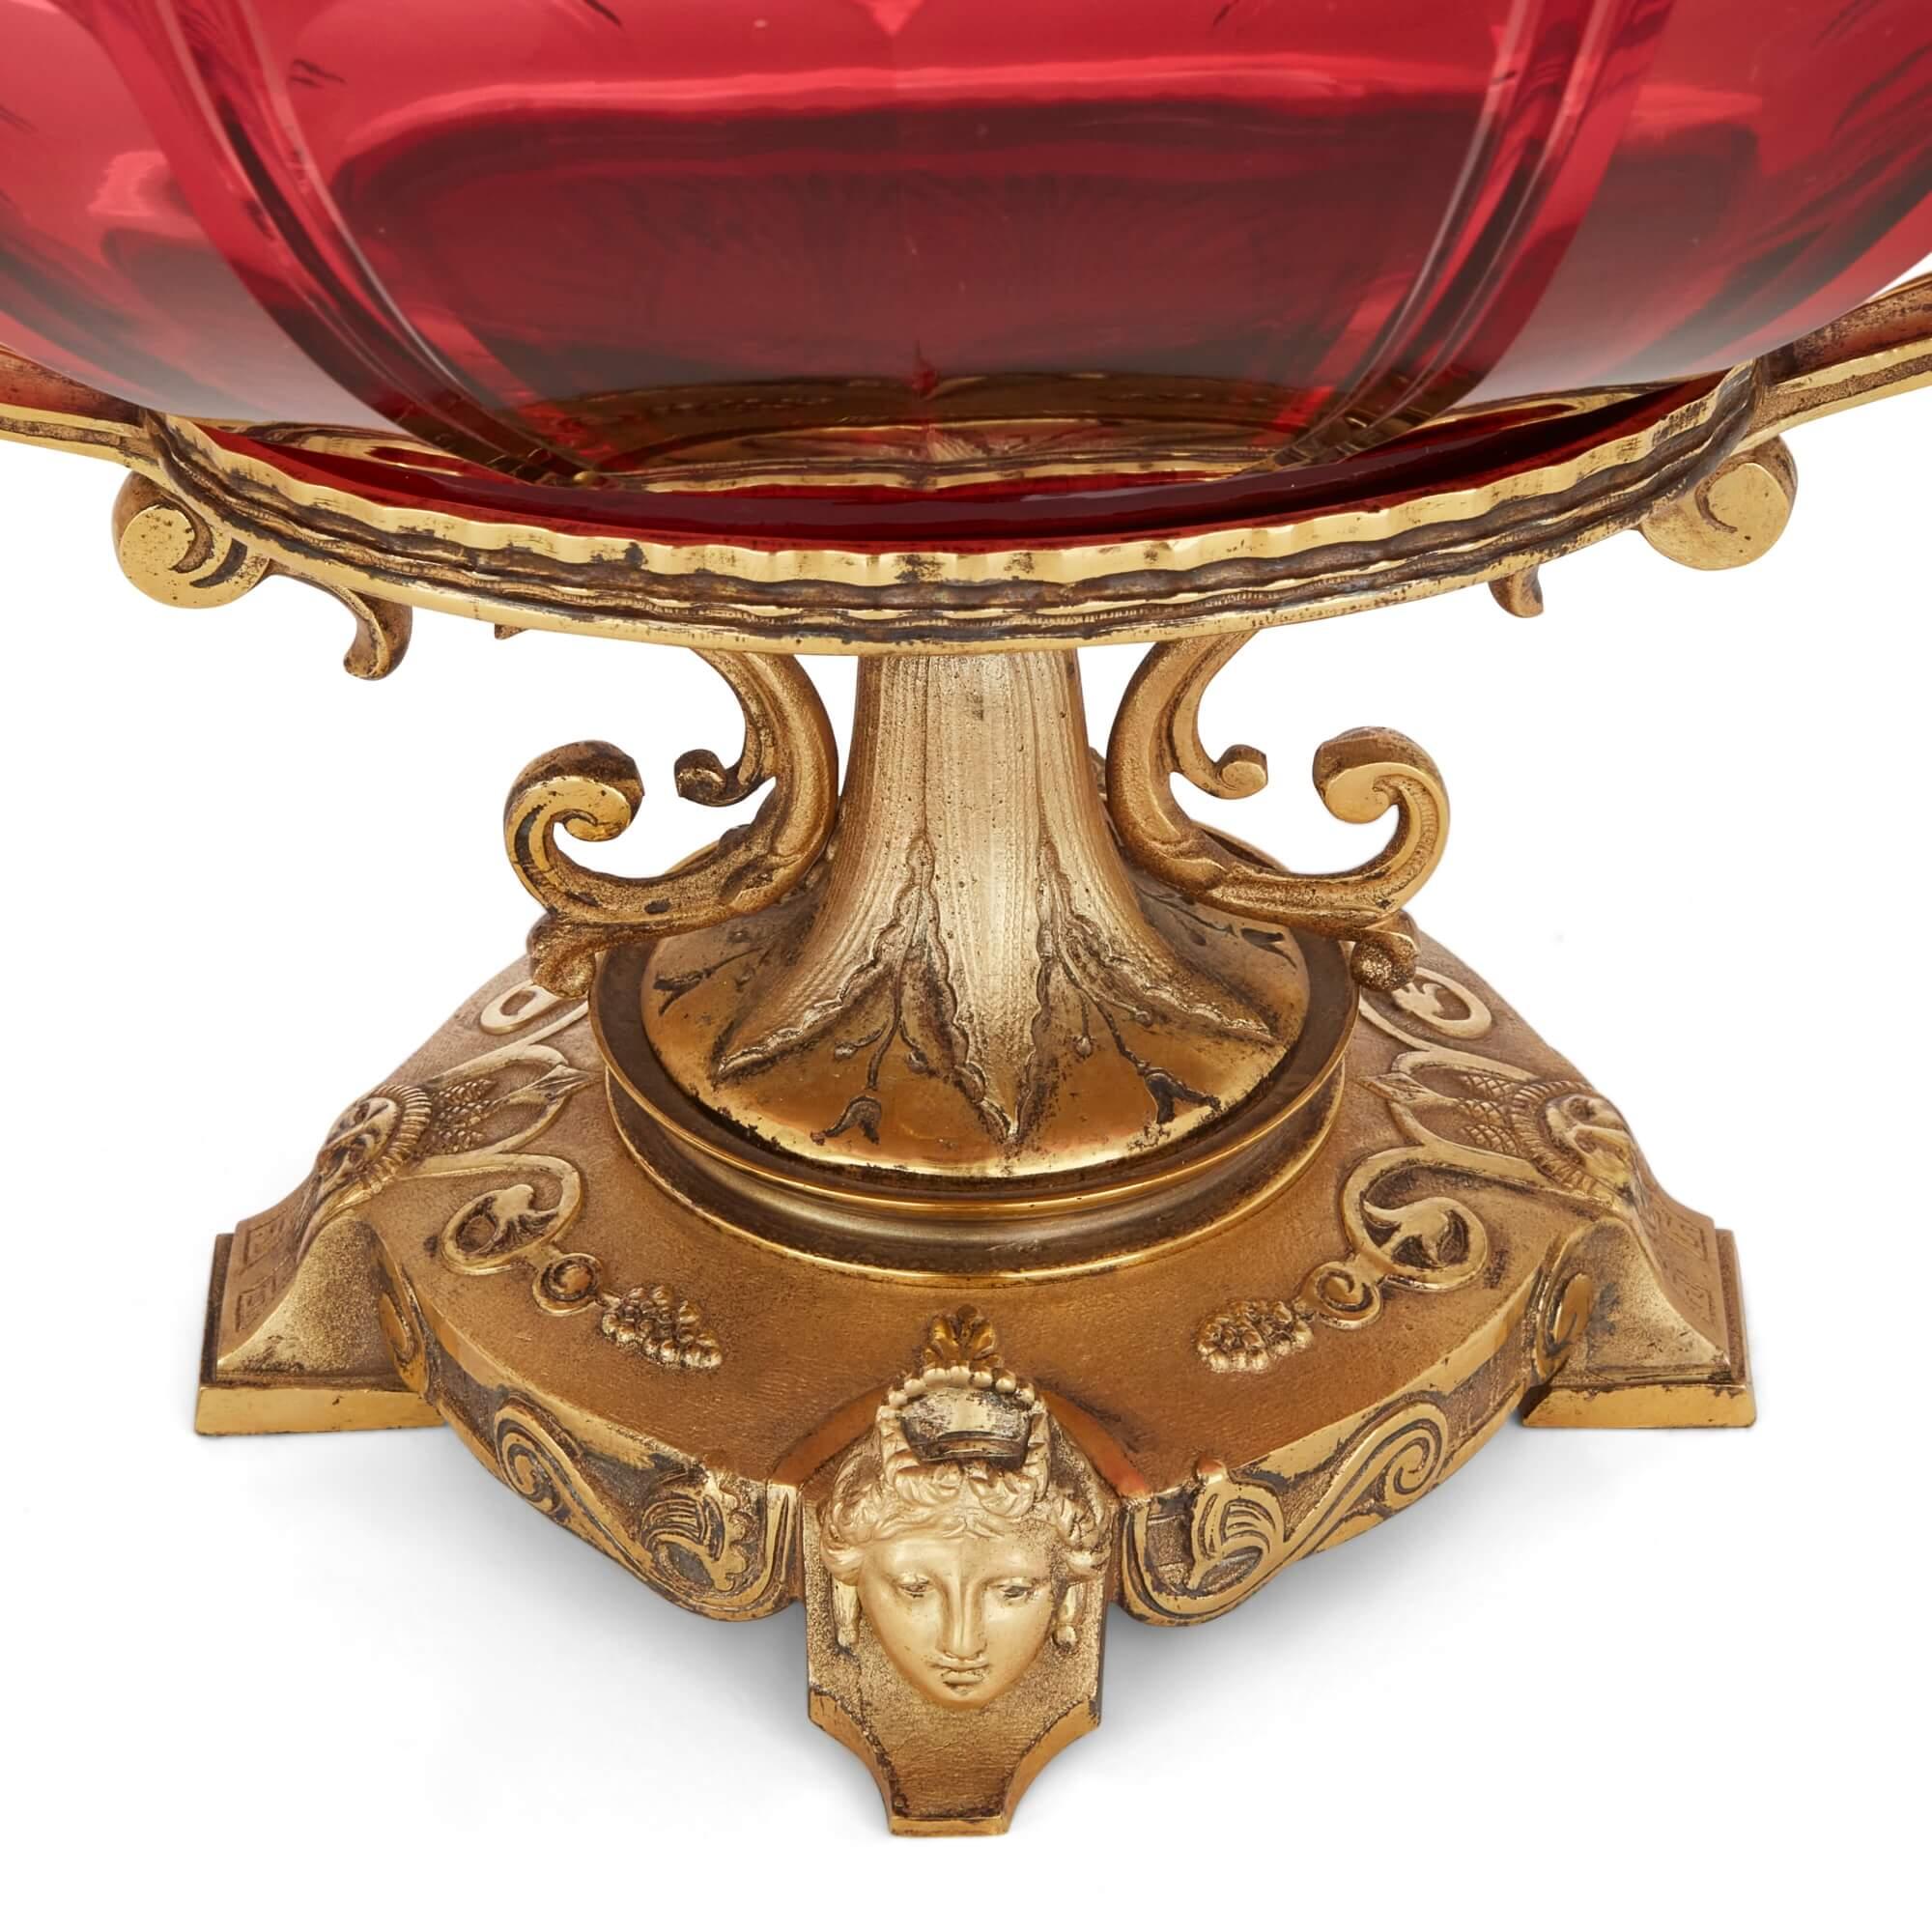 19th Century Large Antique Ormolu Mounted Red Glass Centrepiece Suite by Baccarat